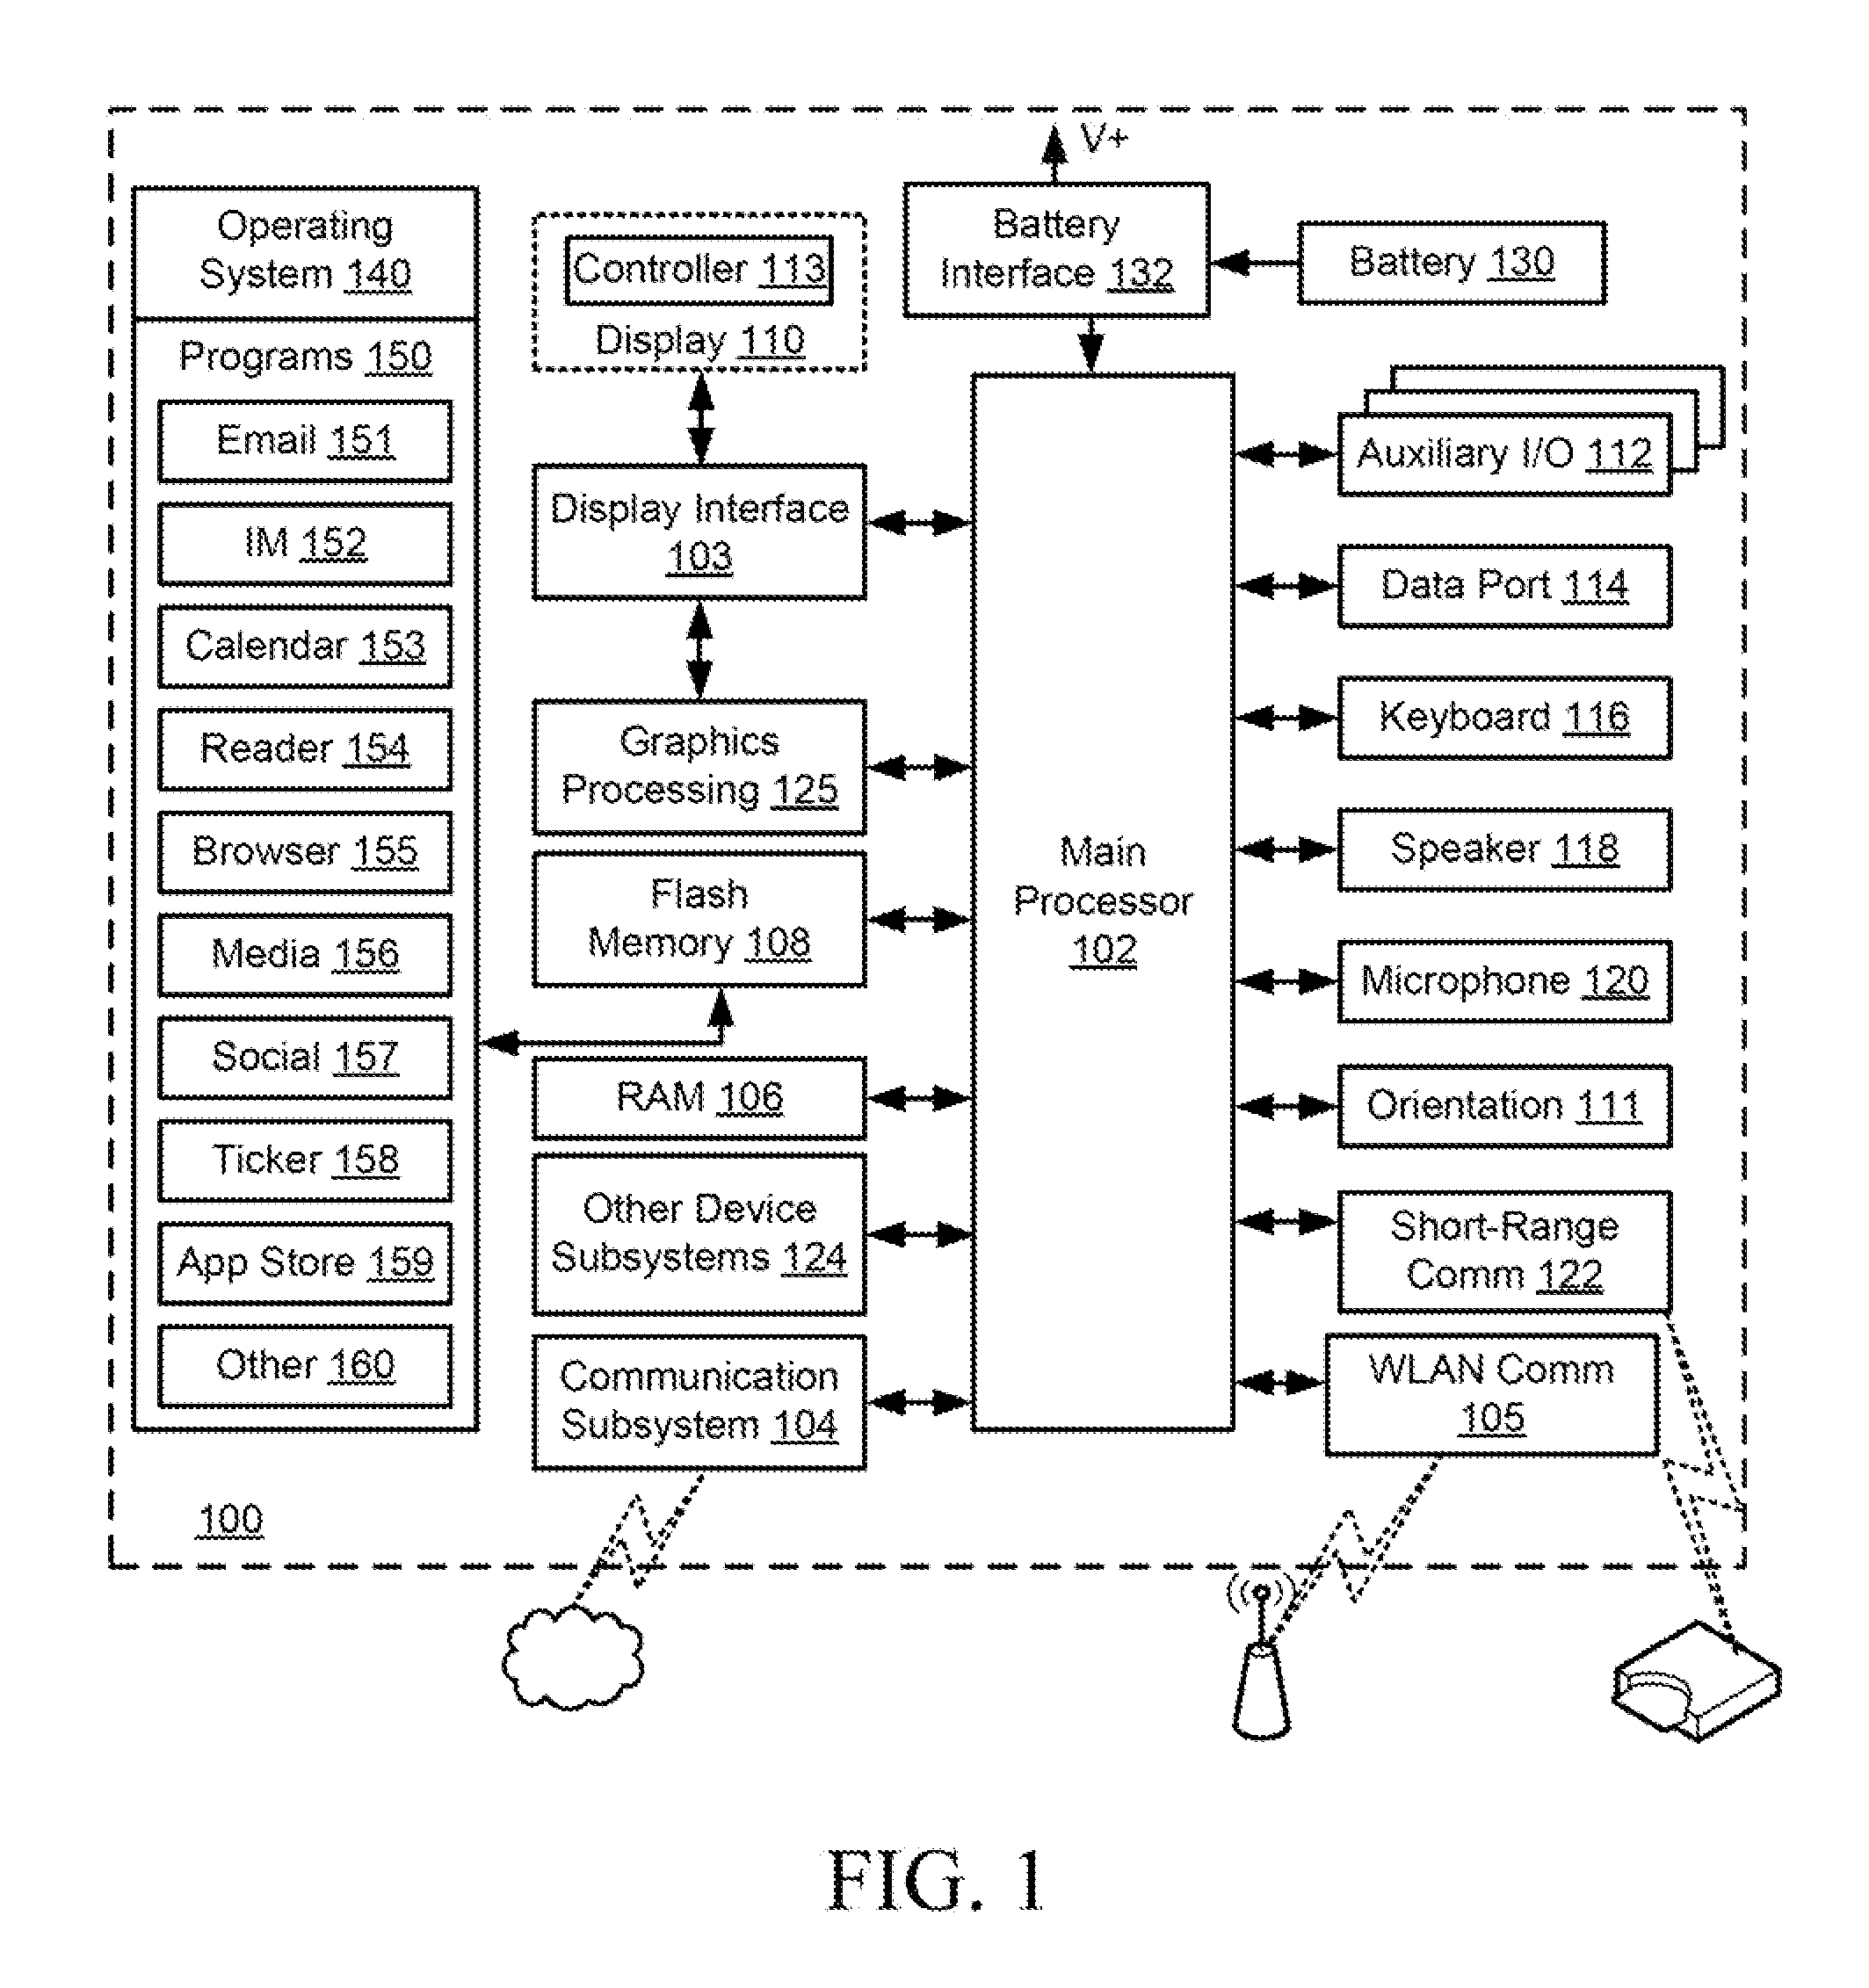 Electronic message metering and traffic management in a networked environment